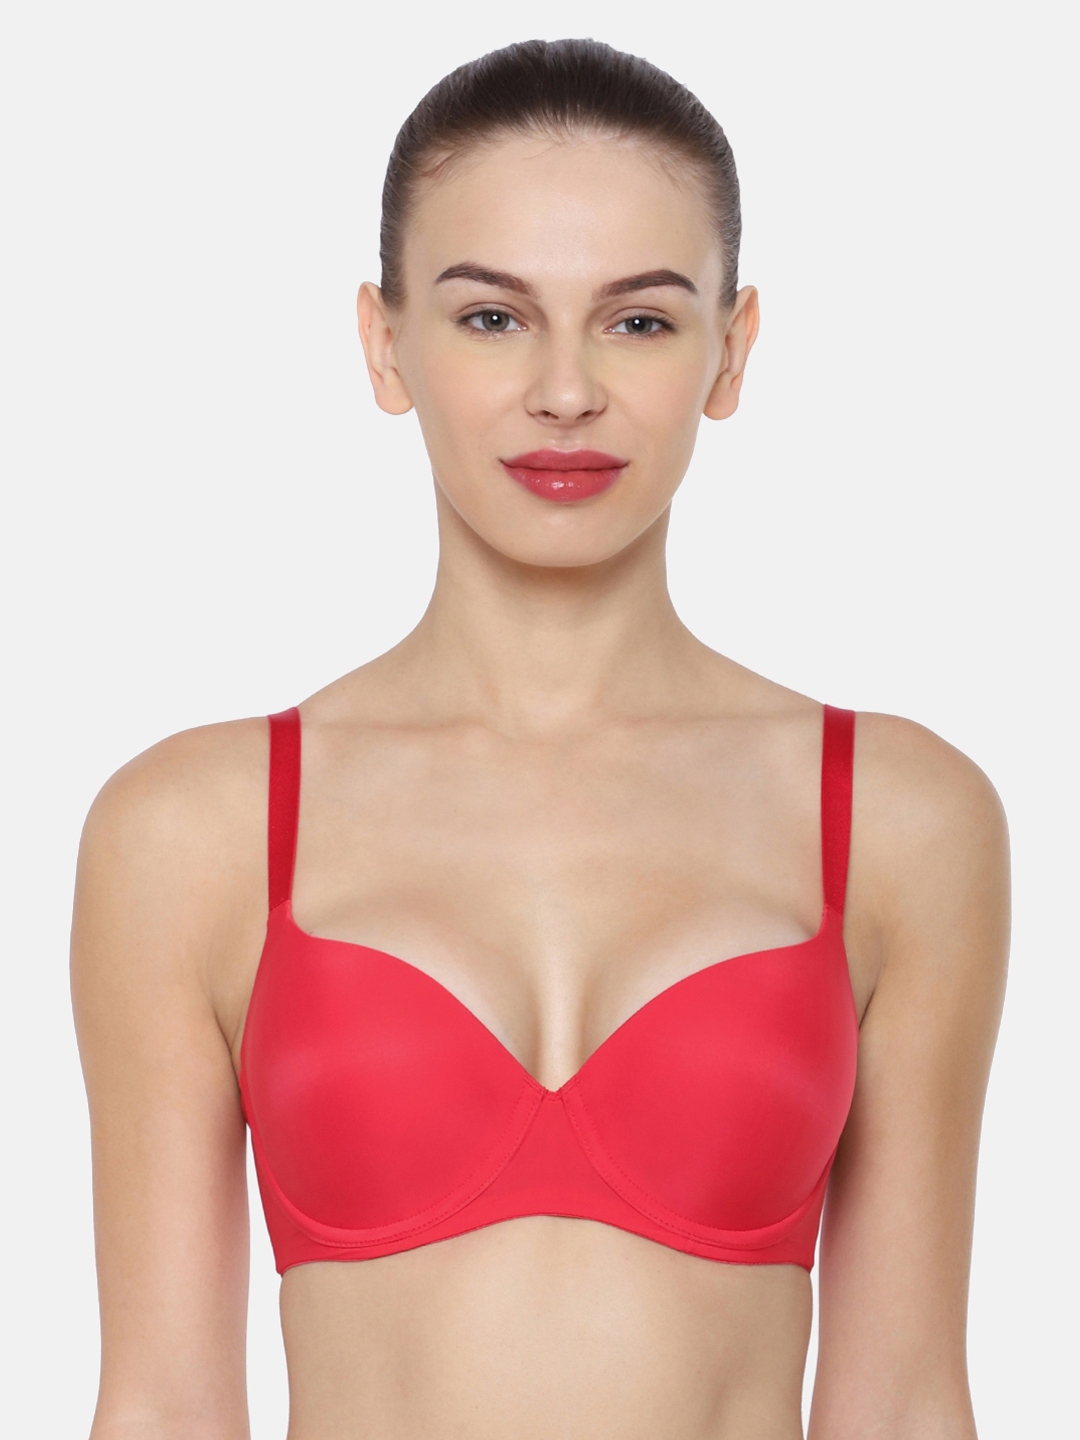 Wired Bras, Invisible, Body Make Up T-Shirt Bra